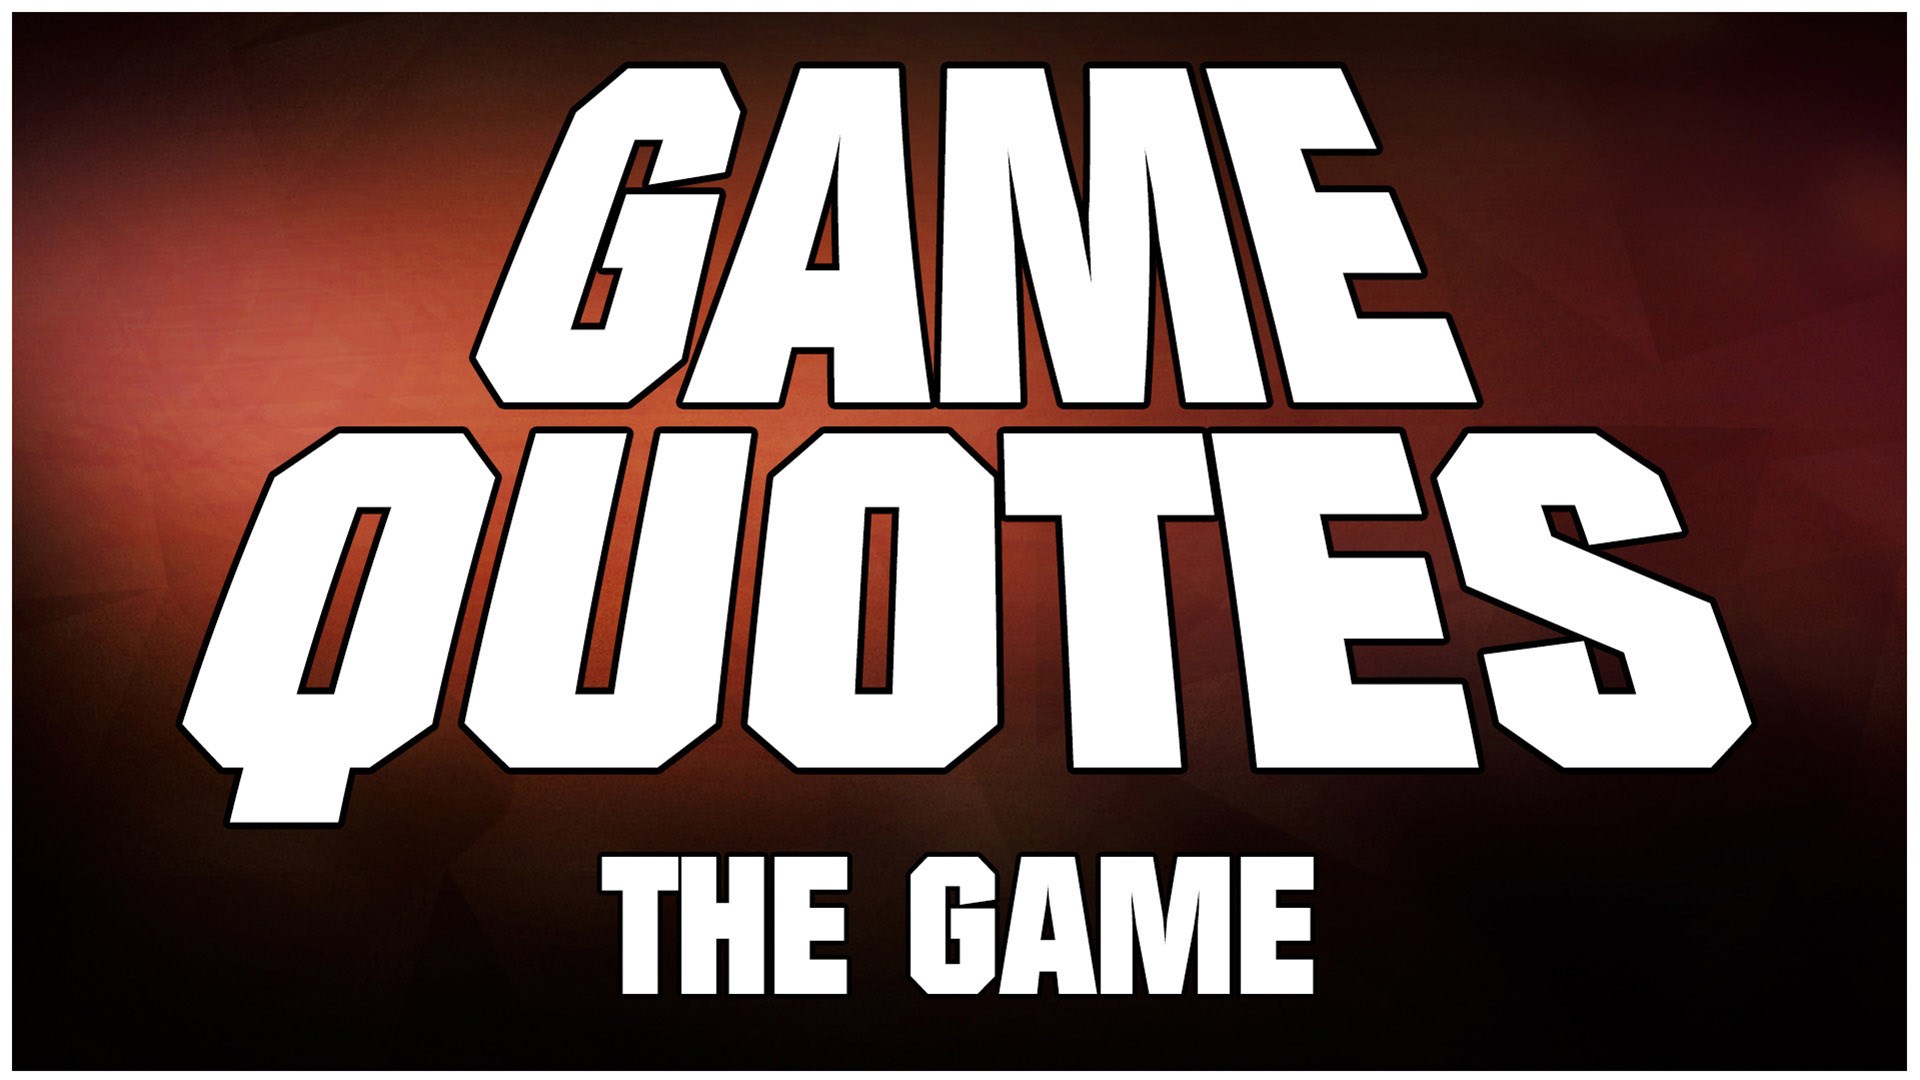 You can buy the game. Game quotes.